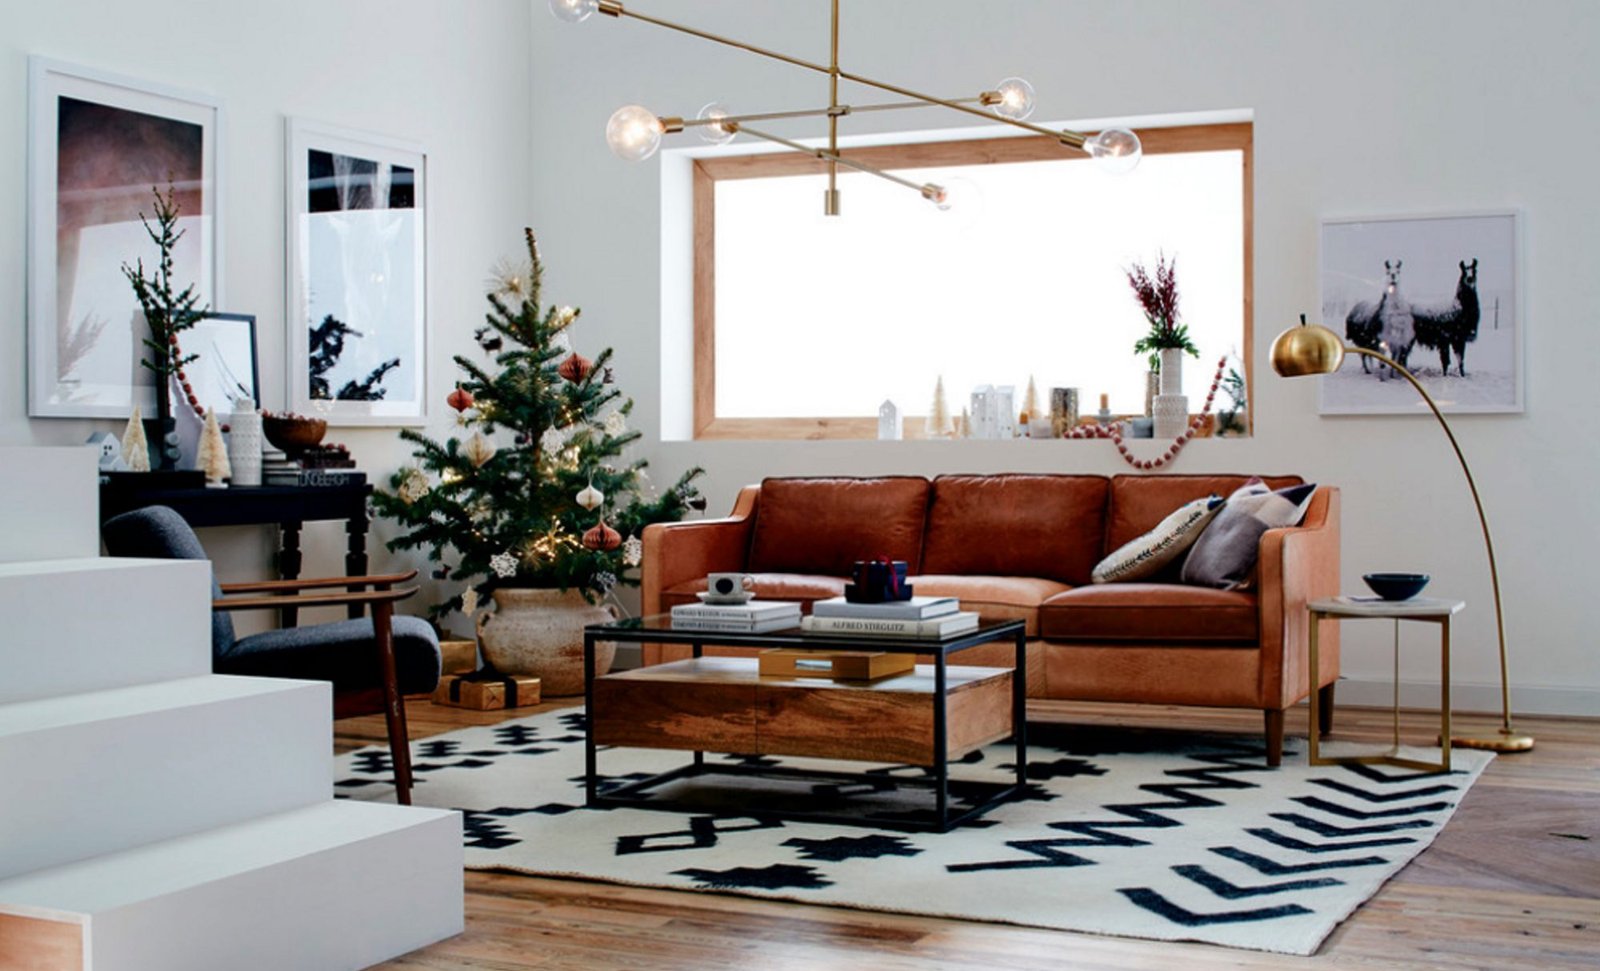 How to Prepare Your Home for Christmas Celebration within a Budget